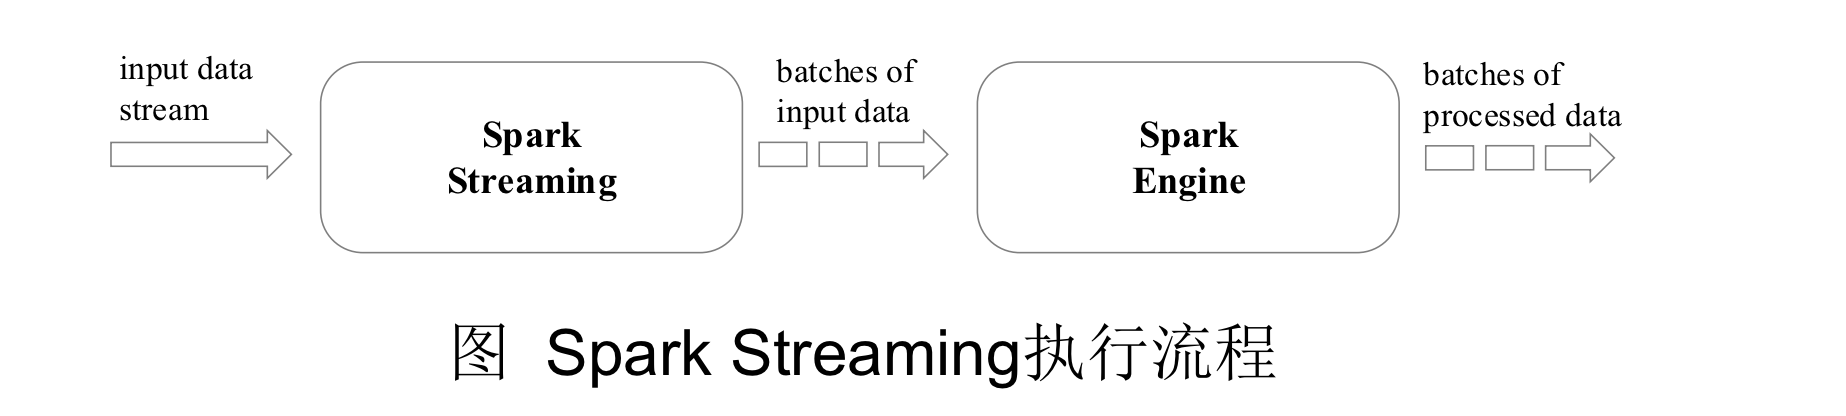 spark-streaming-processing-order